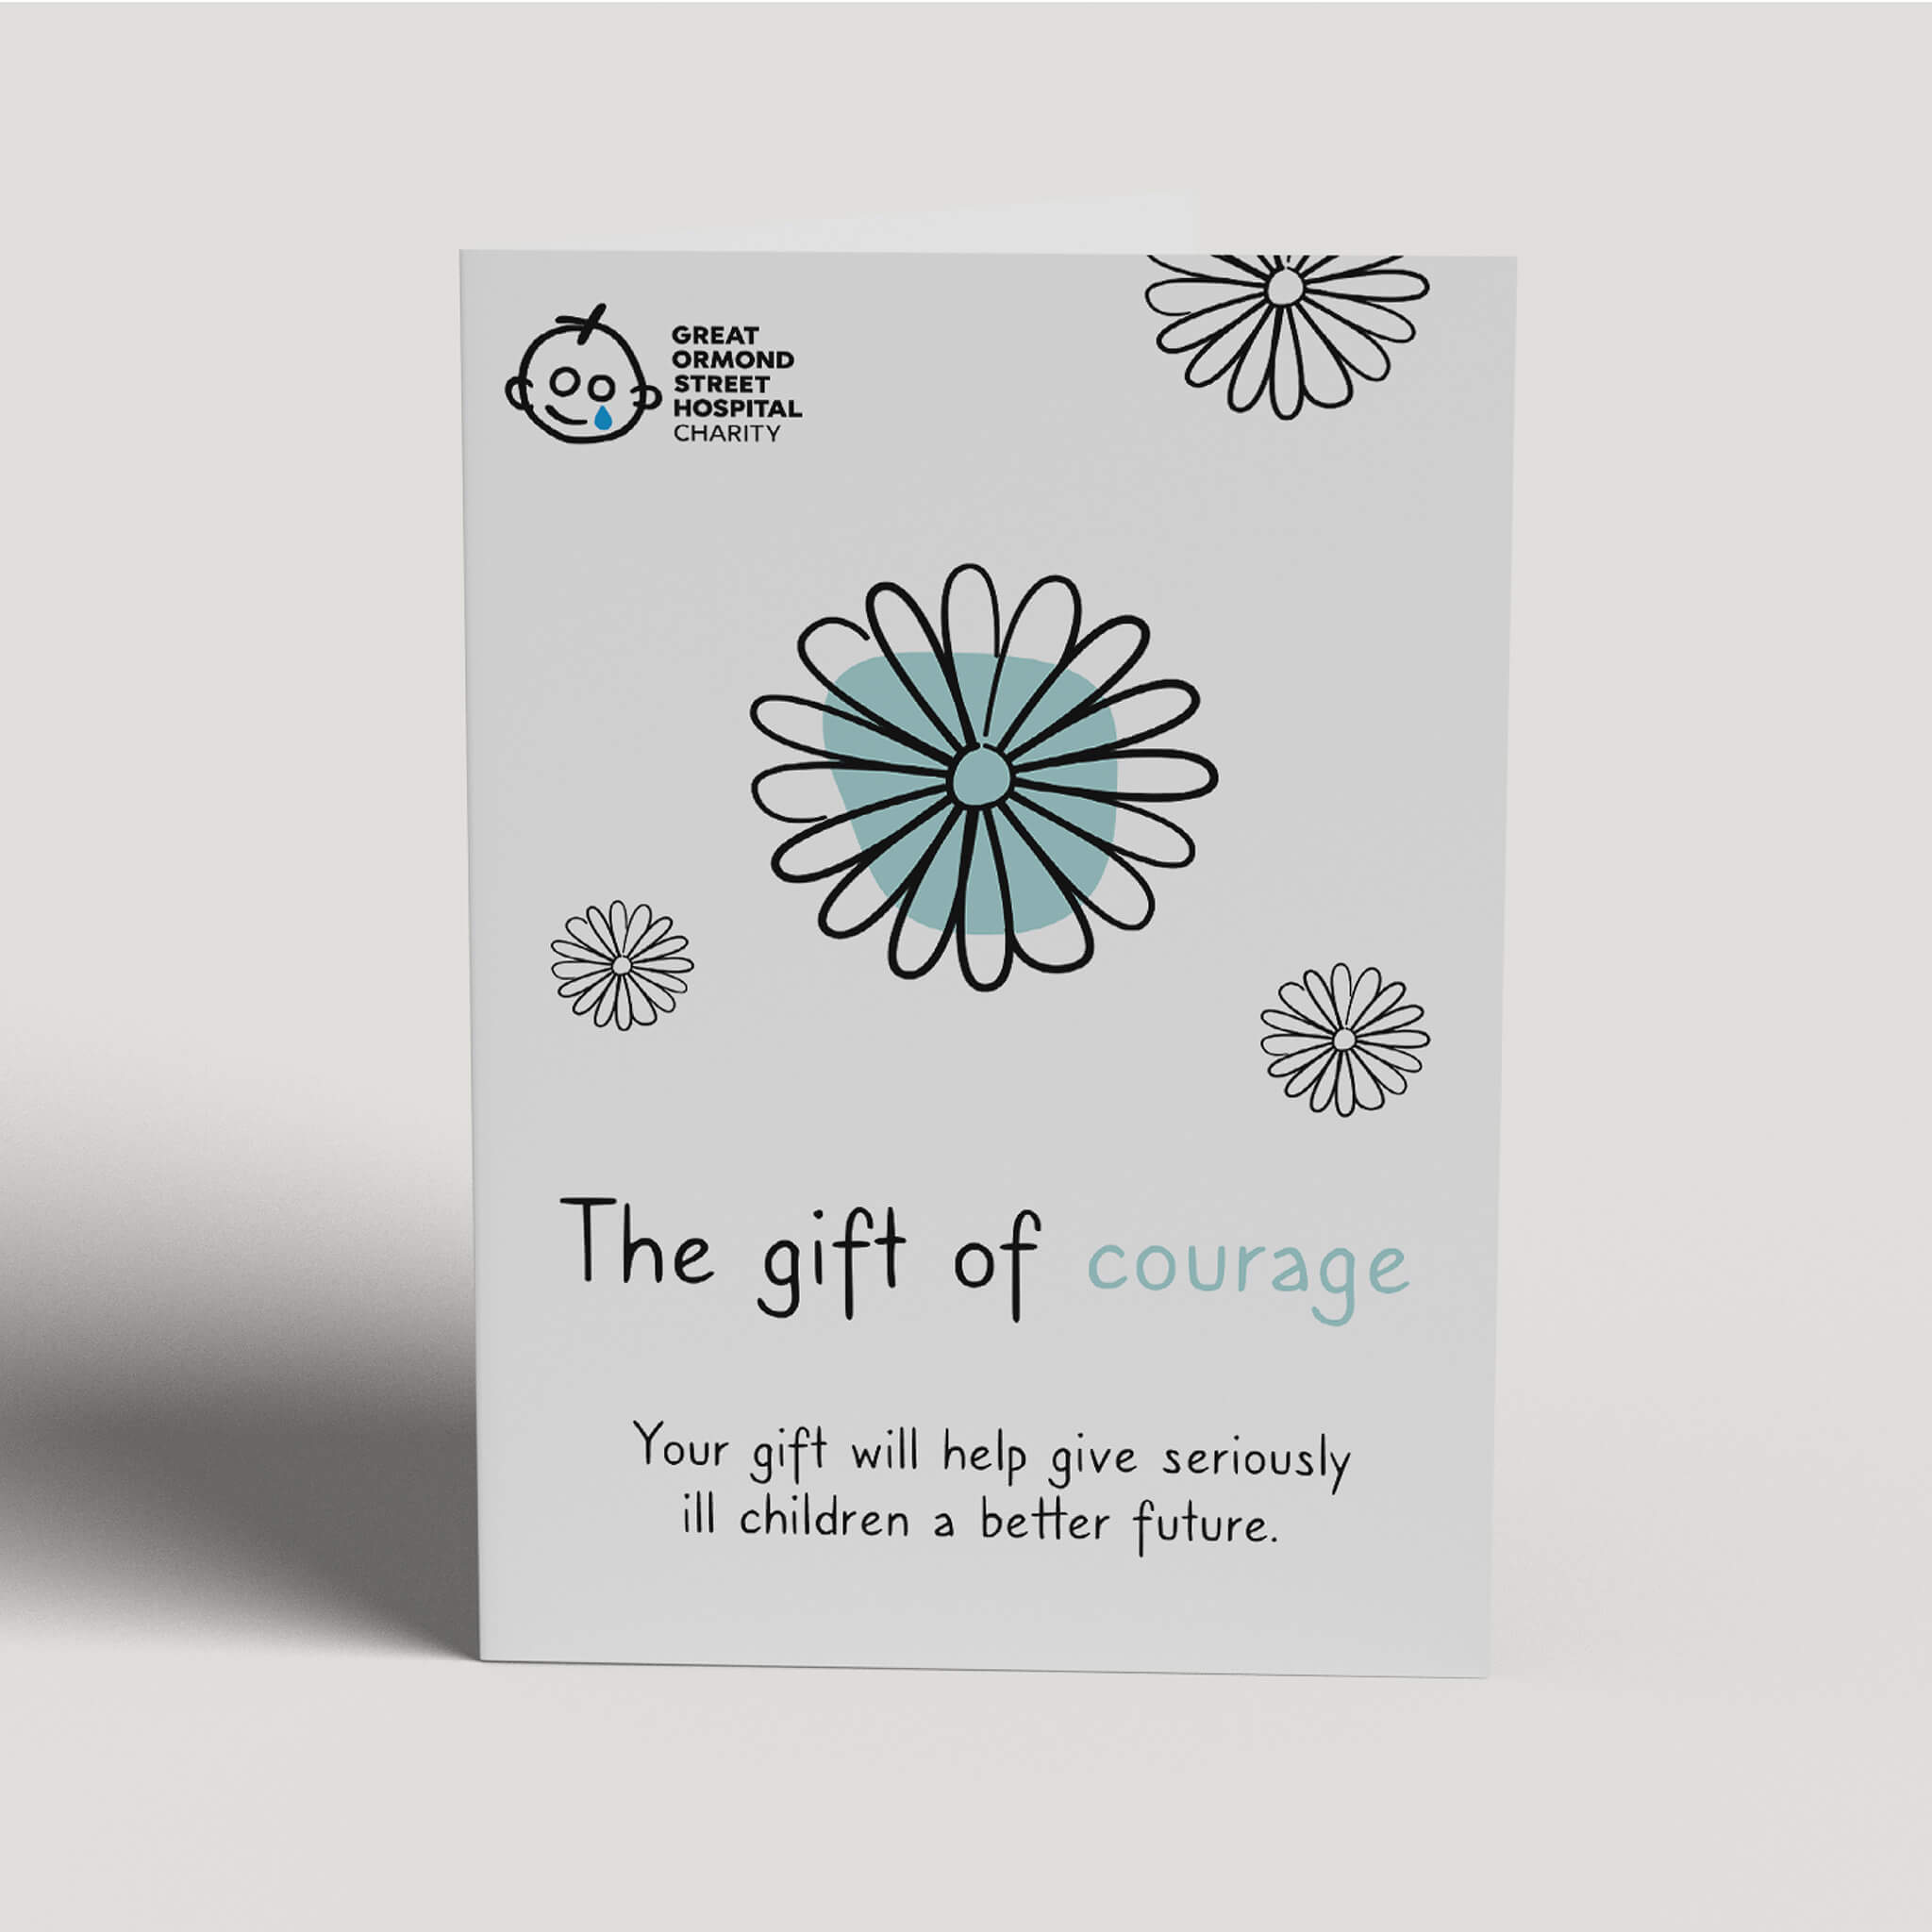 GOSH_Charity_alternative_gift_card_for_play_therapy_donations